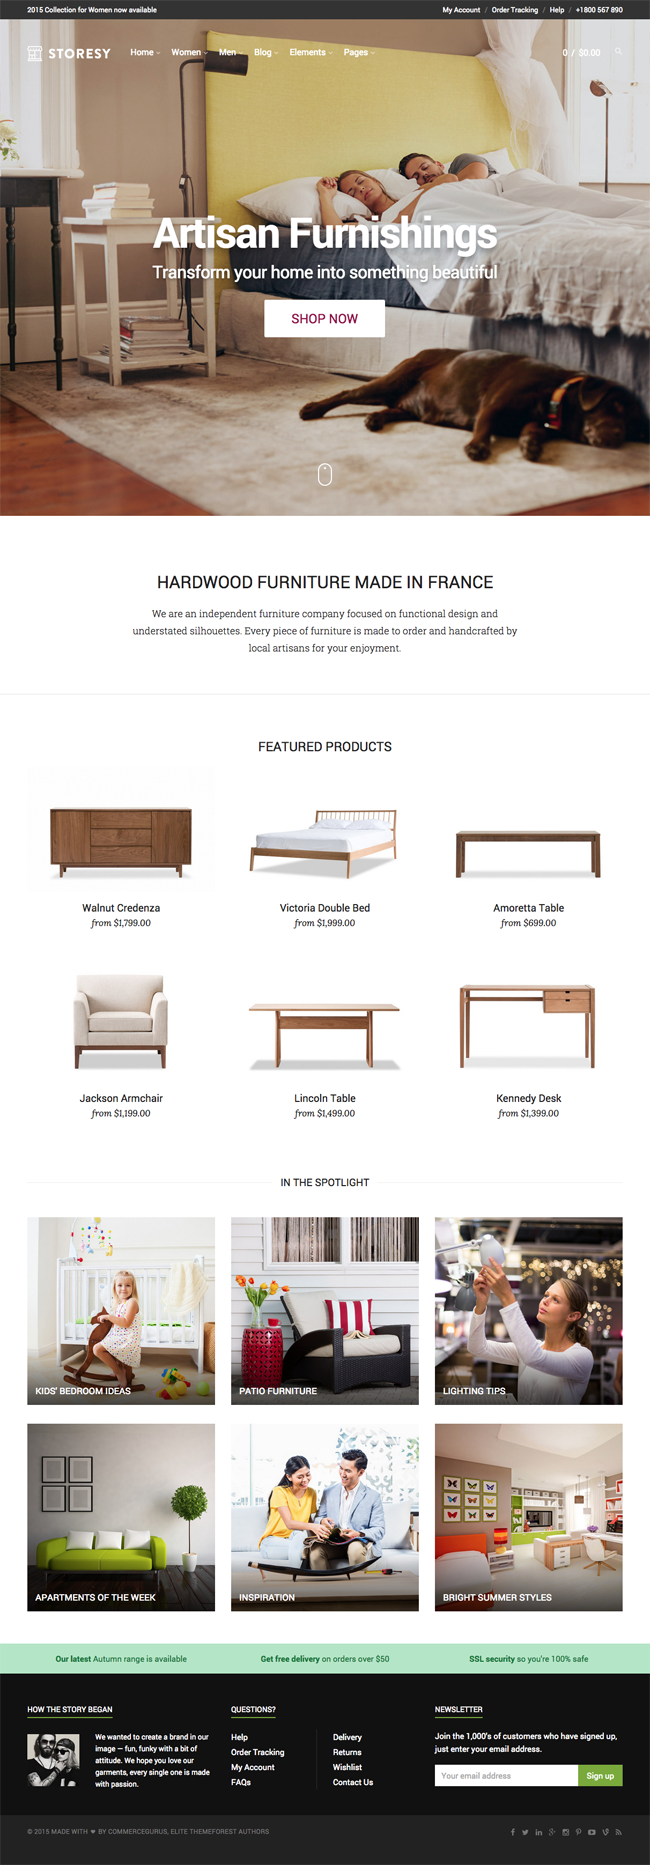 Furnishings Home Page Template